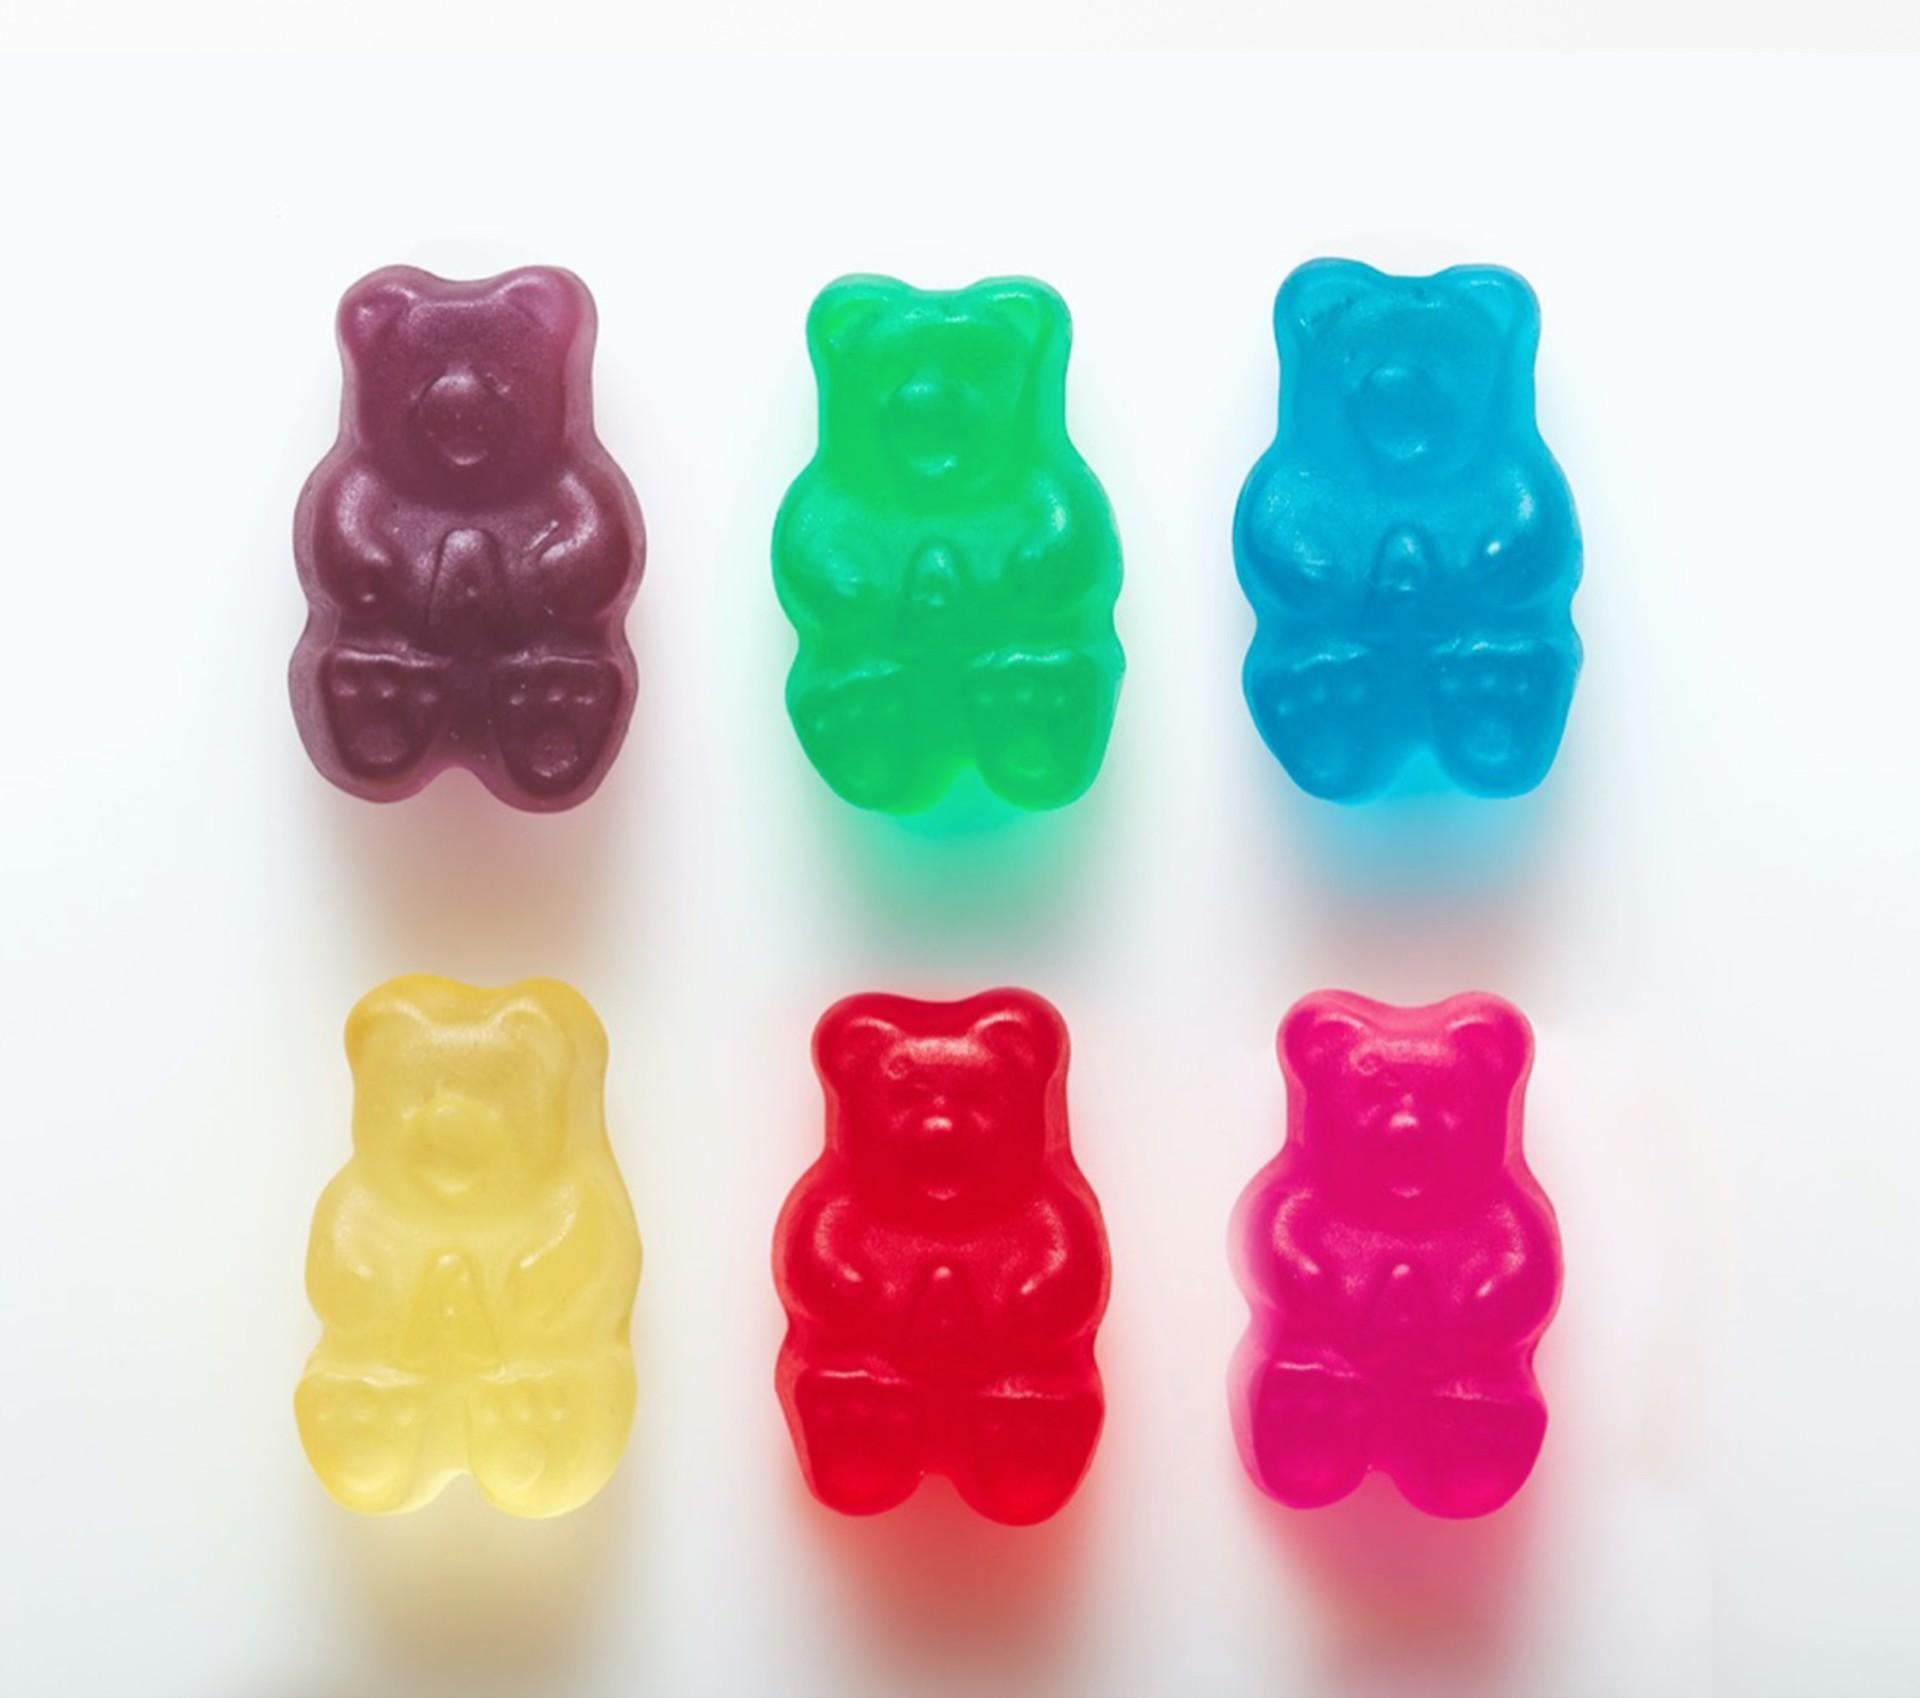 Gummy Bears
Digital C-Print / Archival Pigment Print
Edition of 5 per size
Available sizes:
24 x 24 in.
36 x 36 in.
48 x 48 in.

Refine Sugar Collection.

This photograph will be printed once payment has been received and will ship directly from the